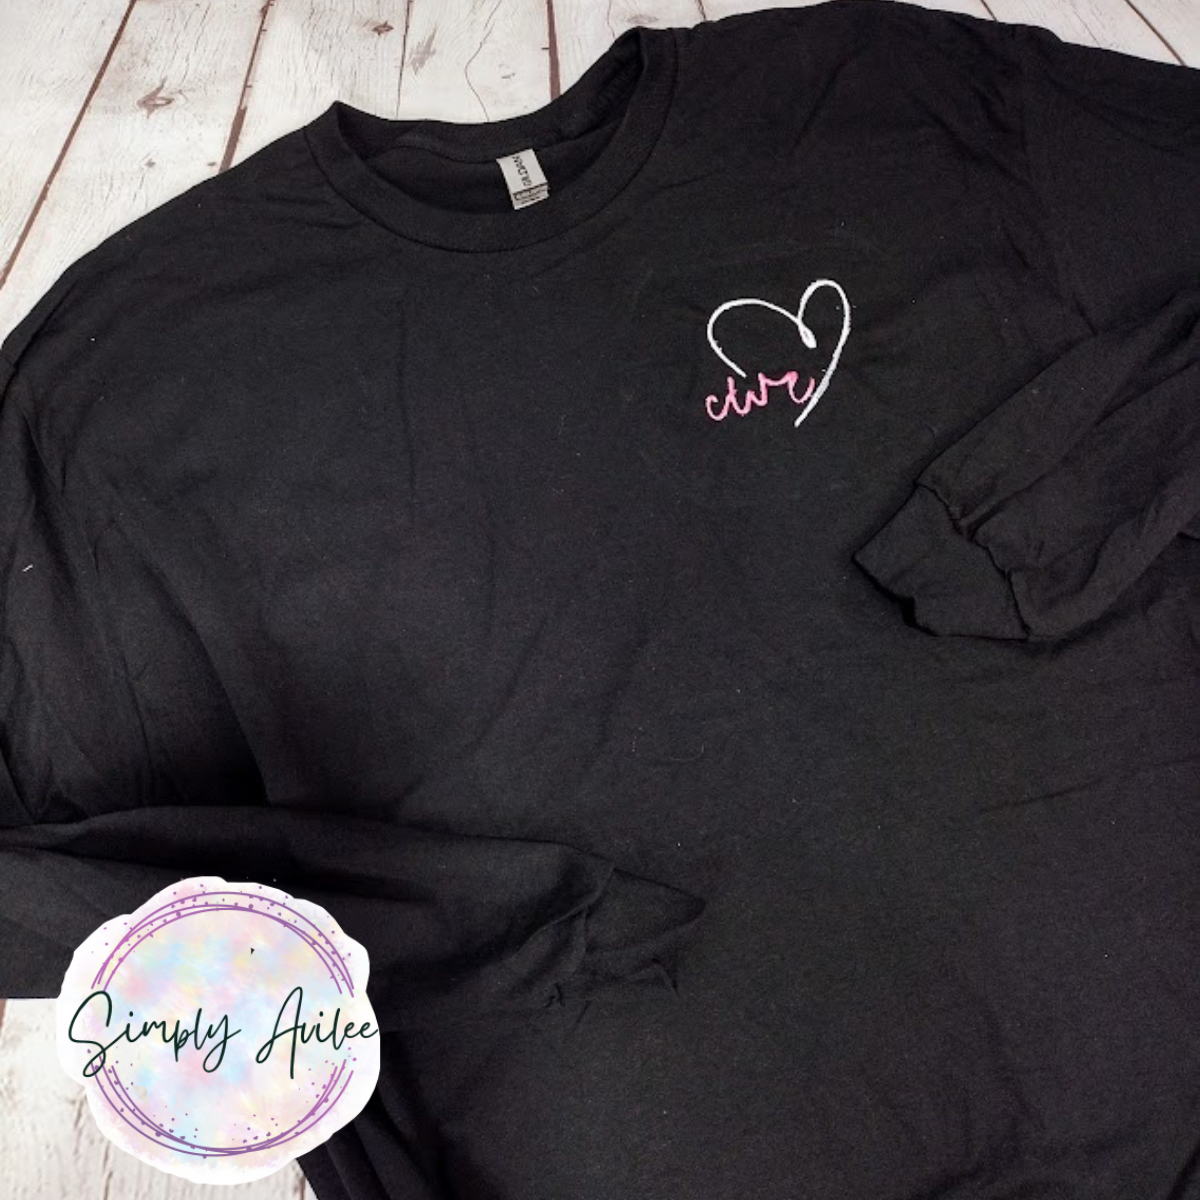 Monogrammed Tee with Hand Drawn Heart